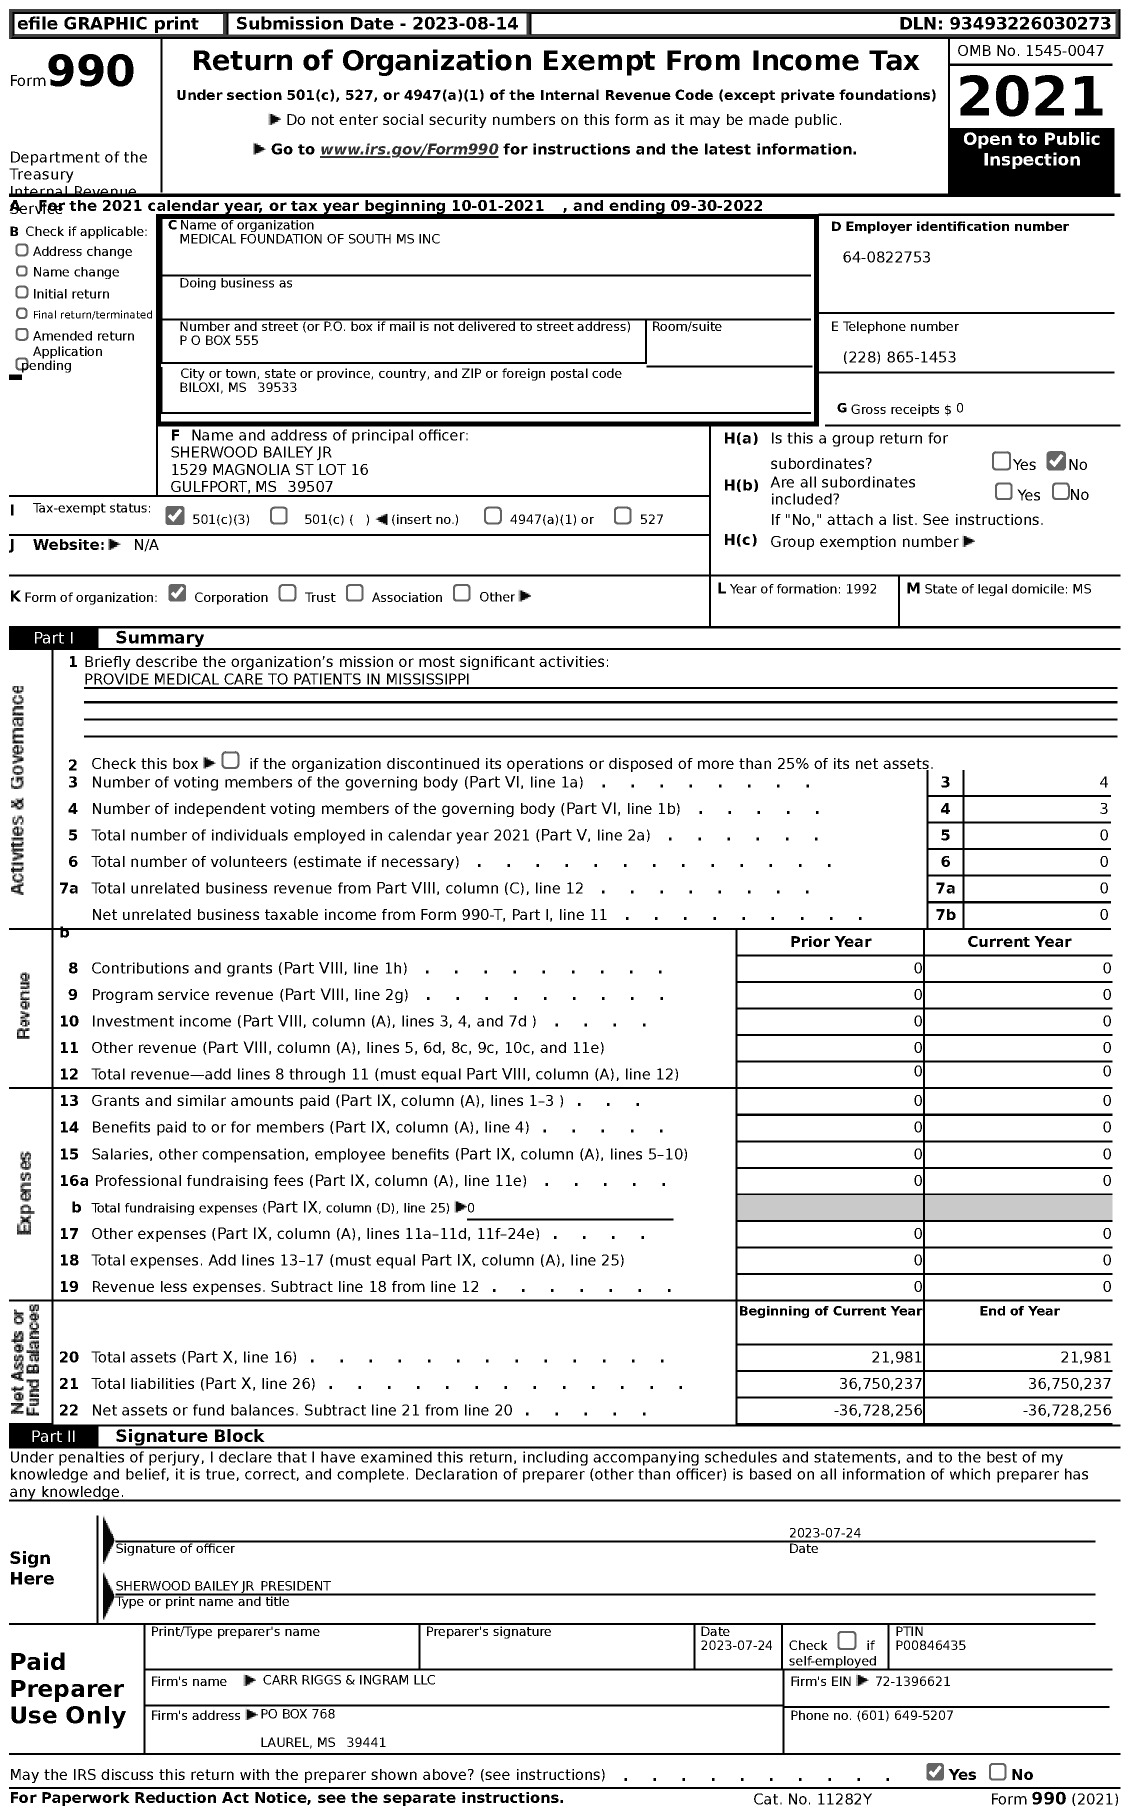 Image of first page of 2021 Form 990 for Medical Foundation of South MS